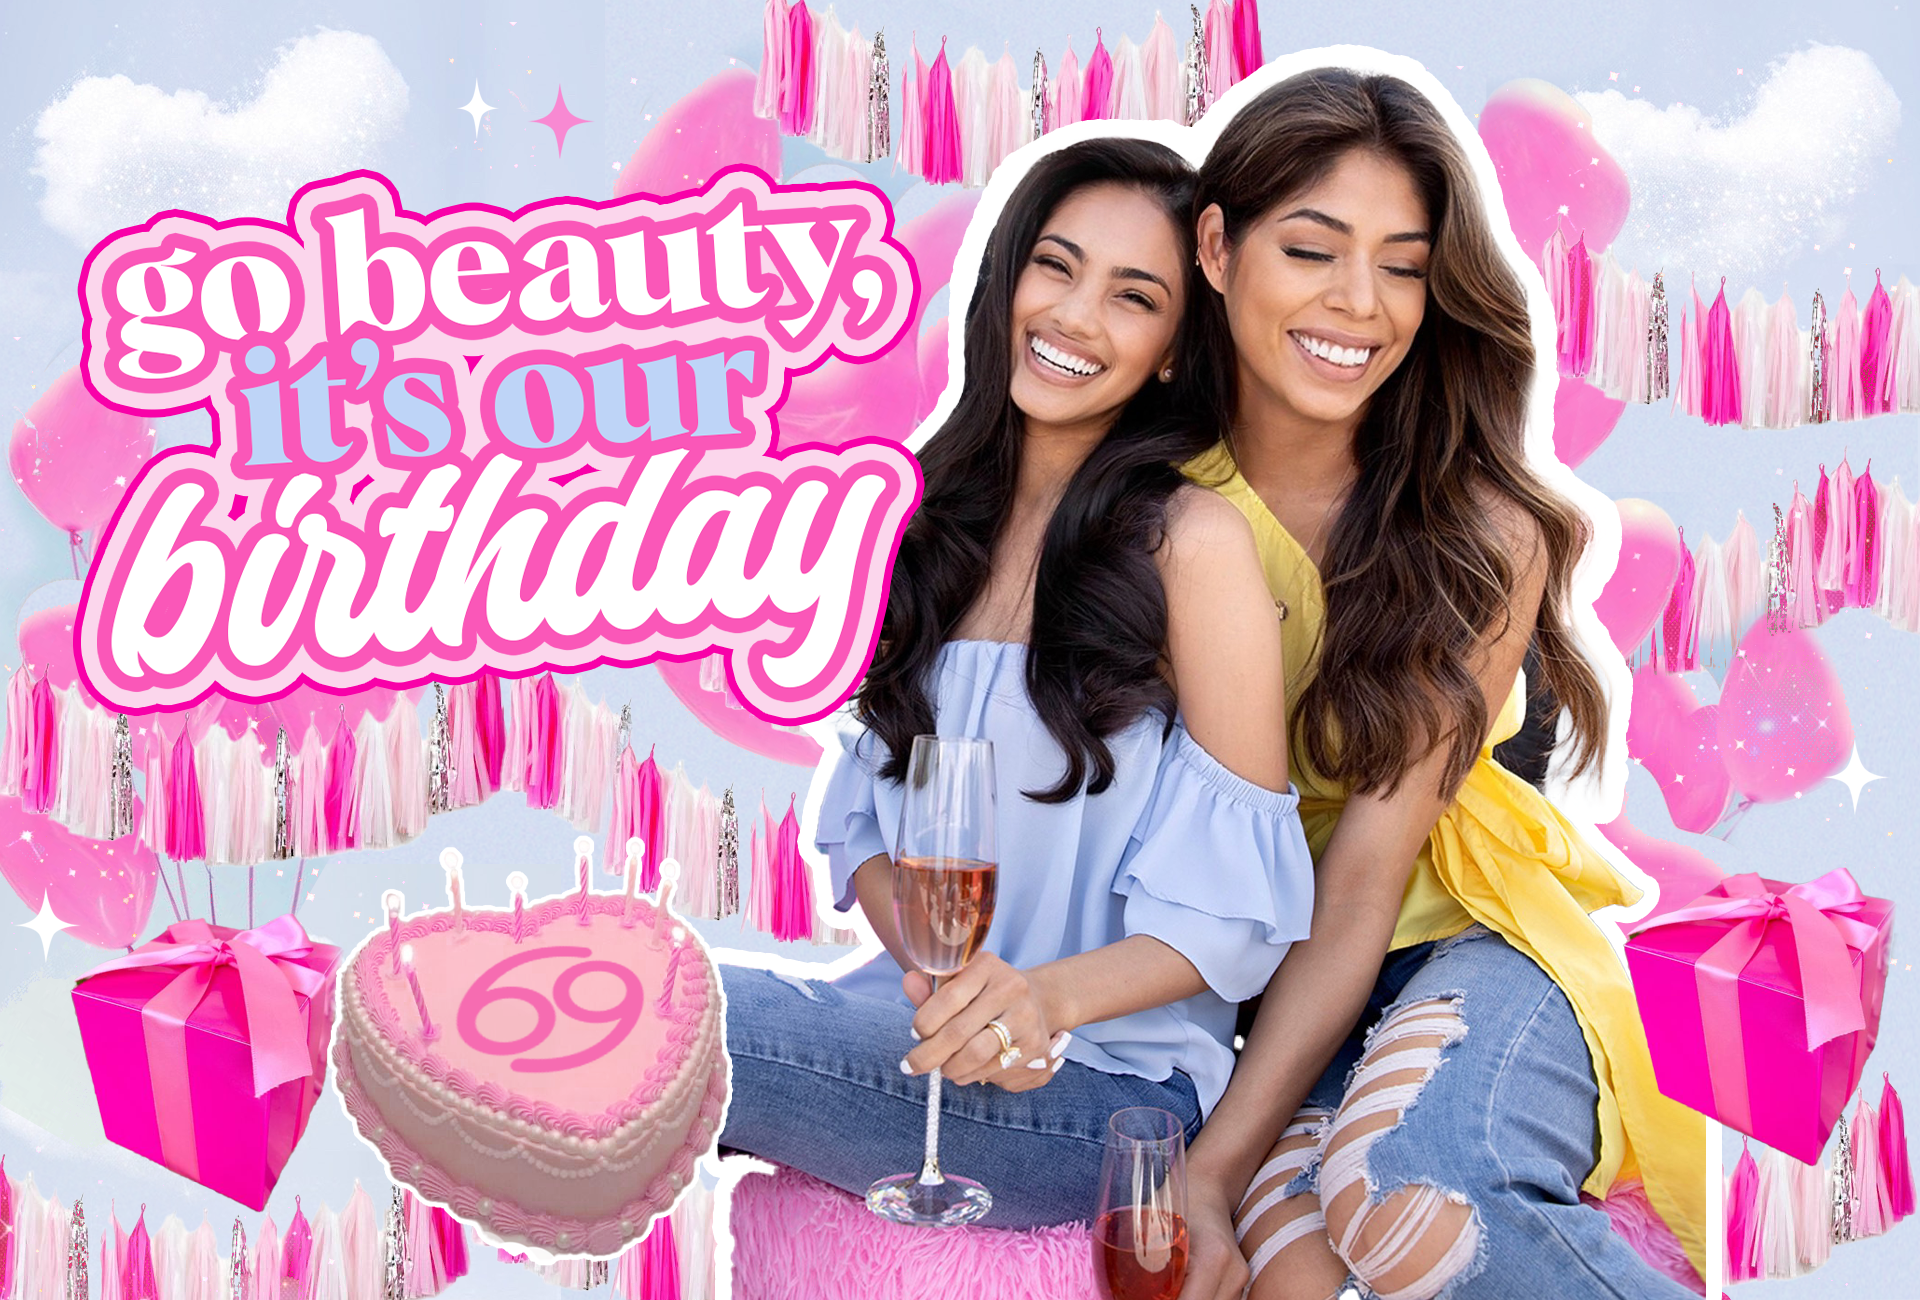 Go Beauty, it’s our Birthday!